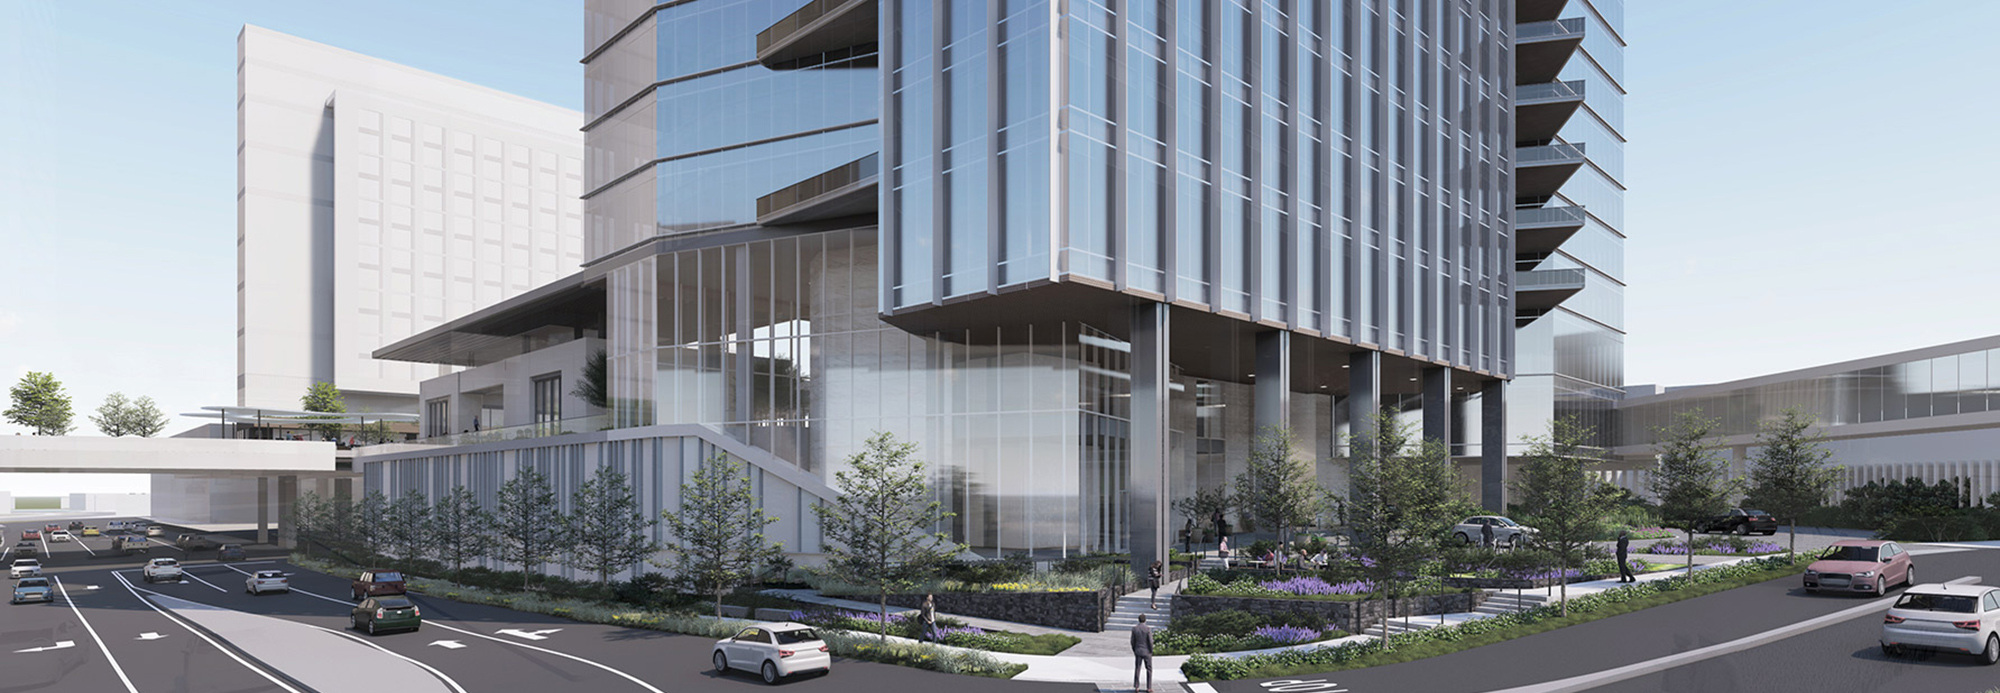 A rendering of the new office building's lower levels